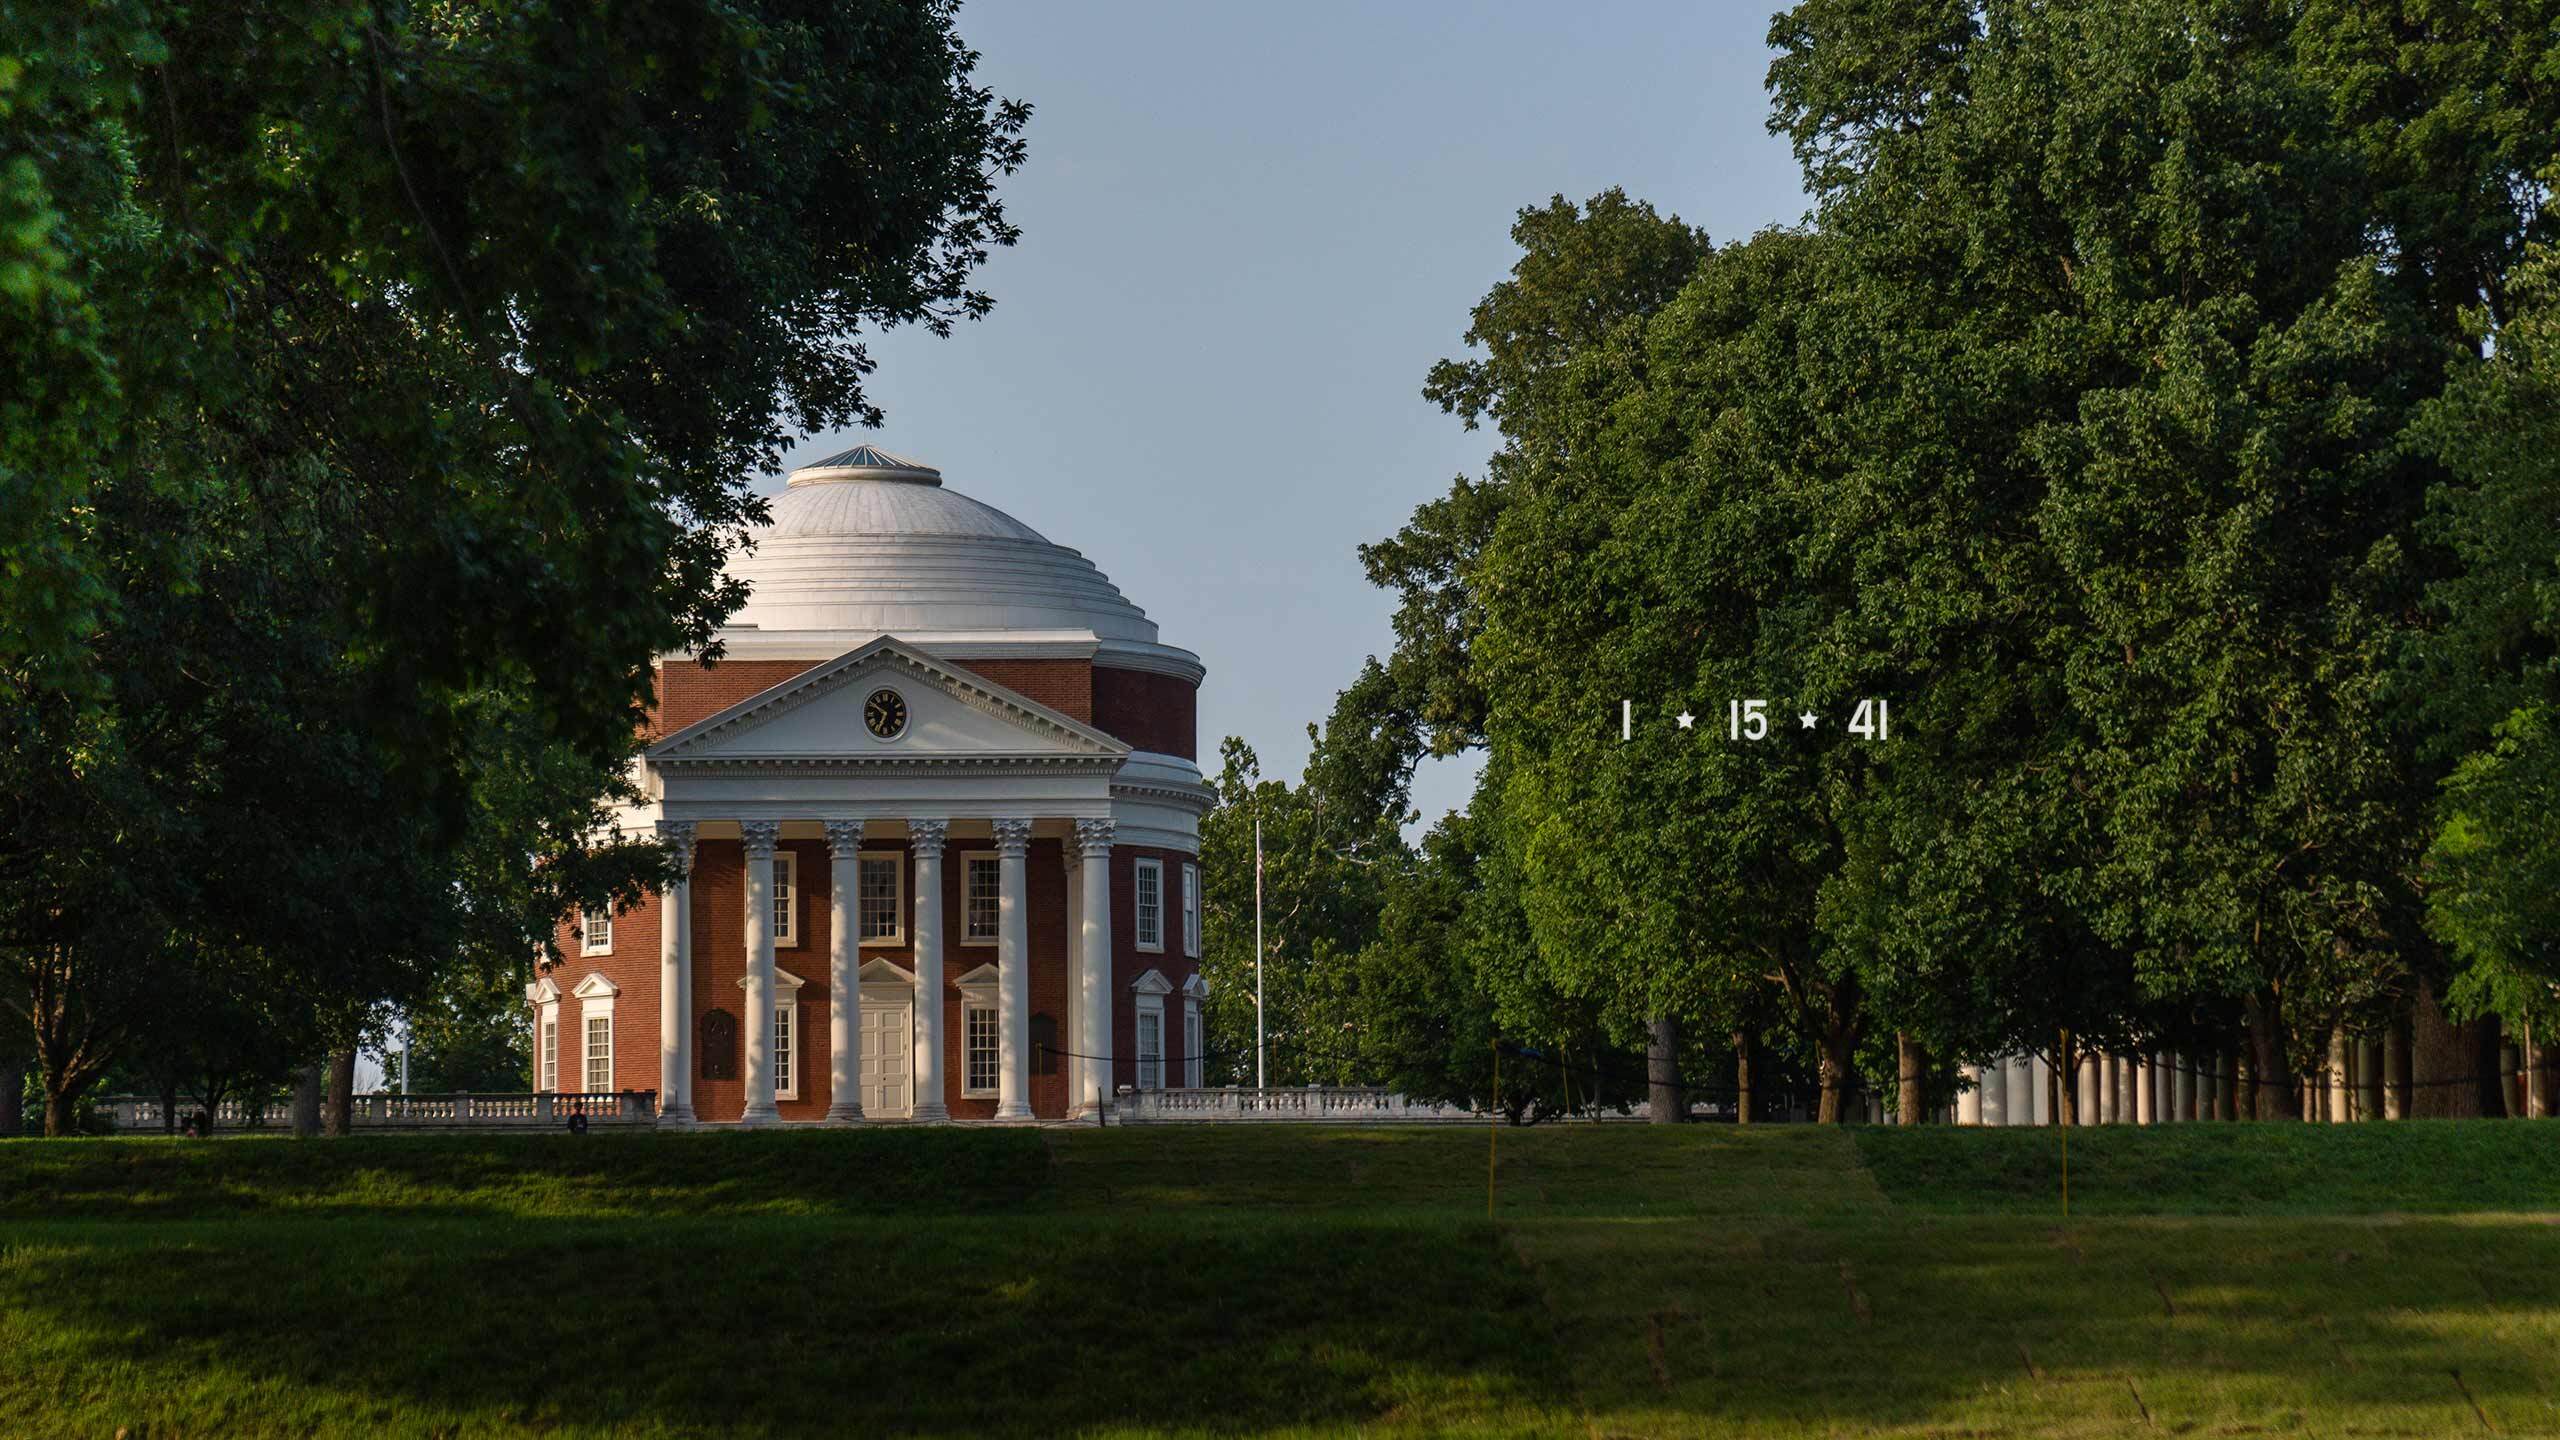 Lawn view of the Rotunda in summer overlayed with the numbers 1, 15, and 41